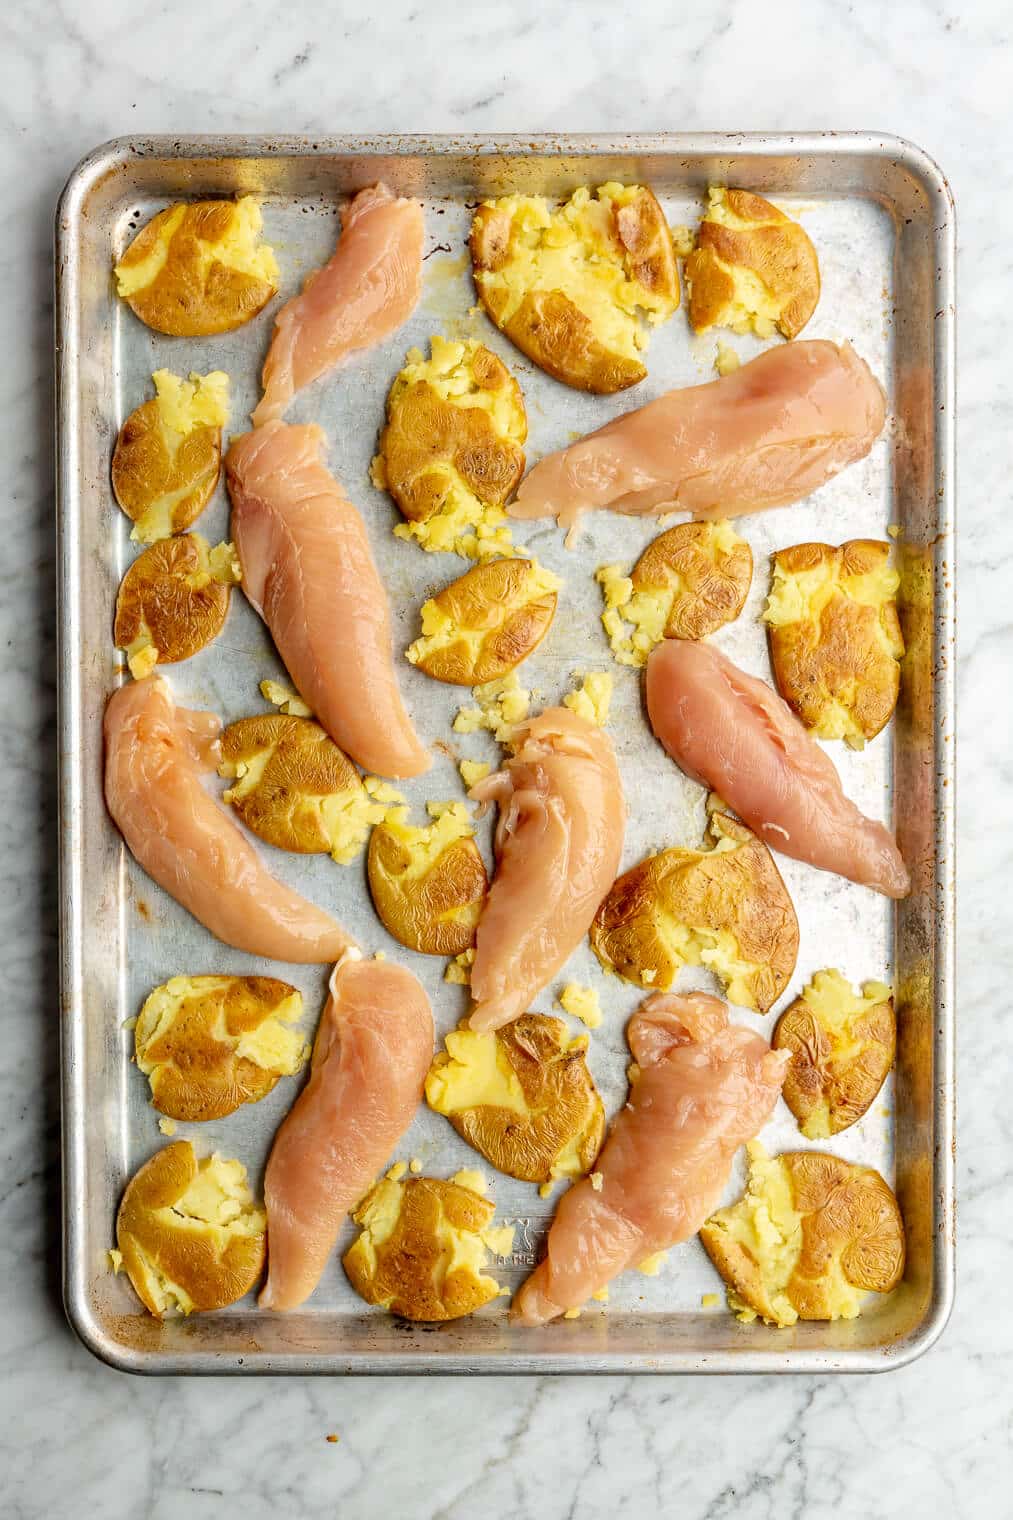 Smashed potatoes and raw chicken tenders on a sheet pan.